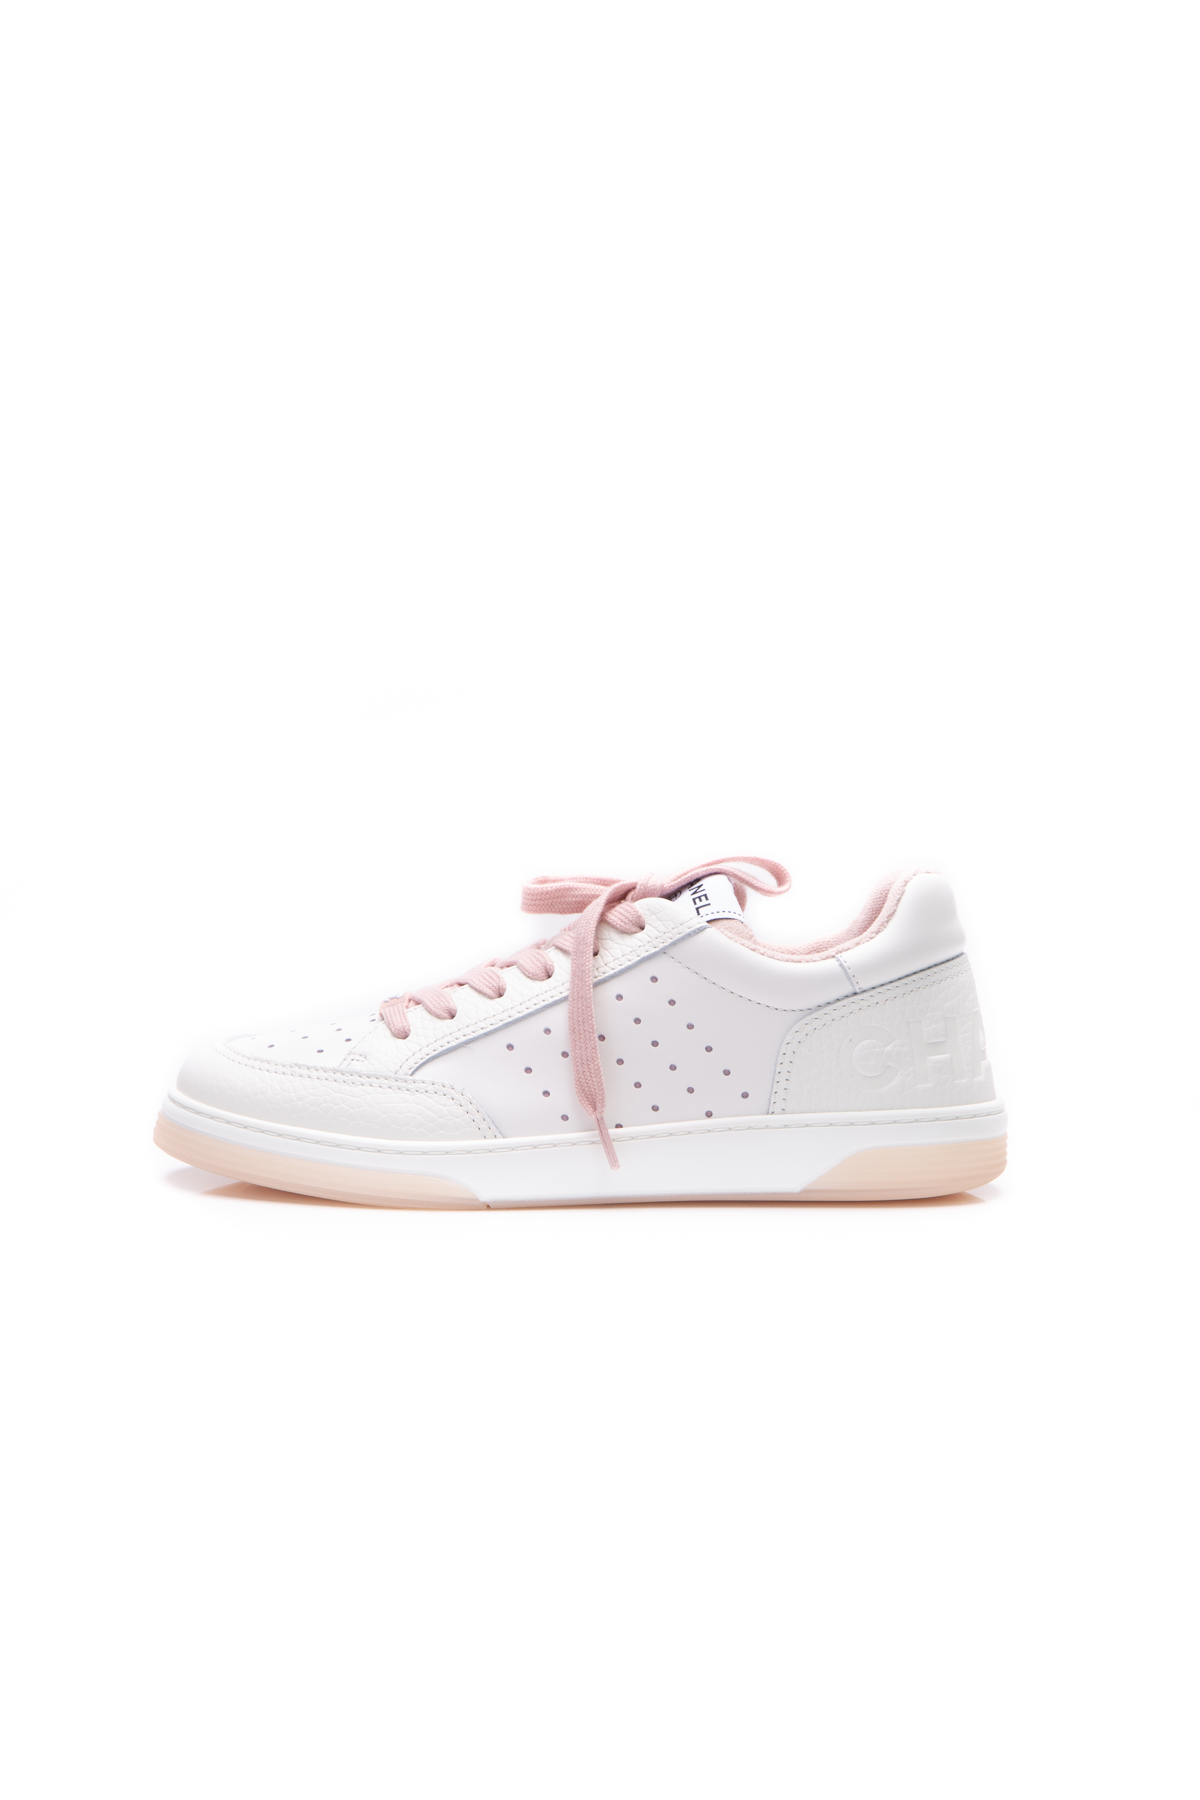 Louis Vuitton Ladies Pink Trainers Sneakers Shoes size 37.5 UK 4.5